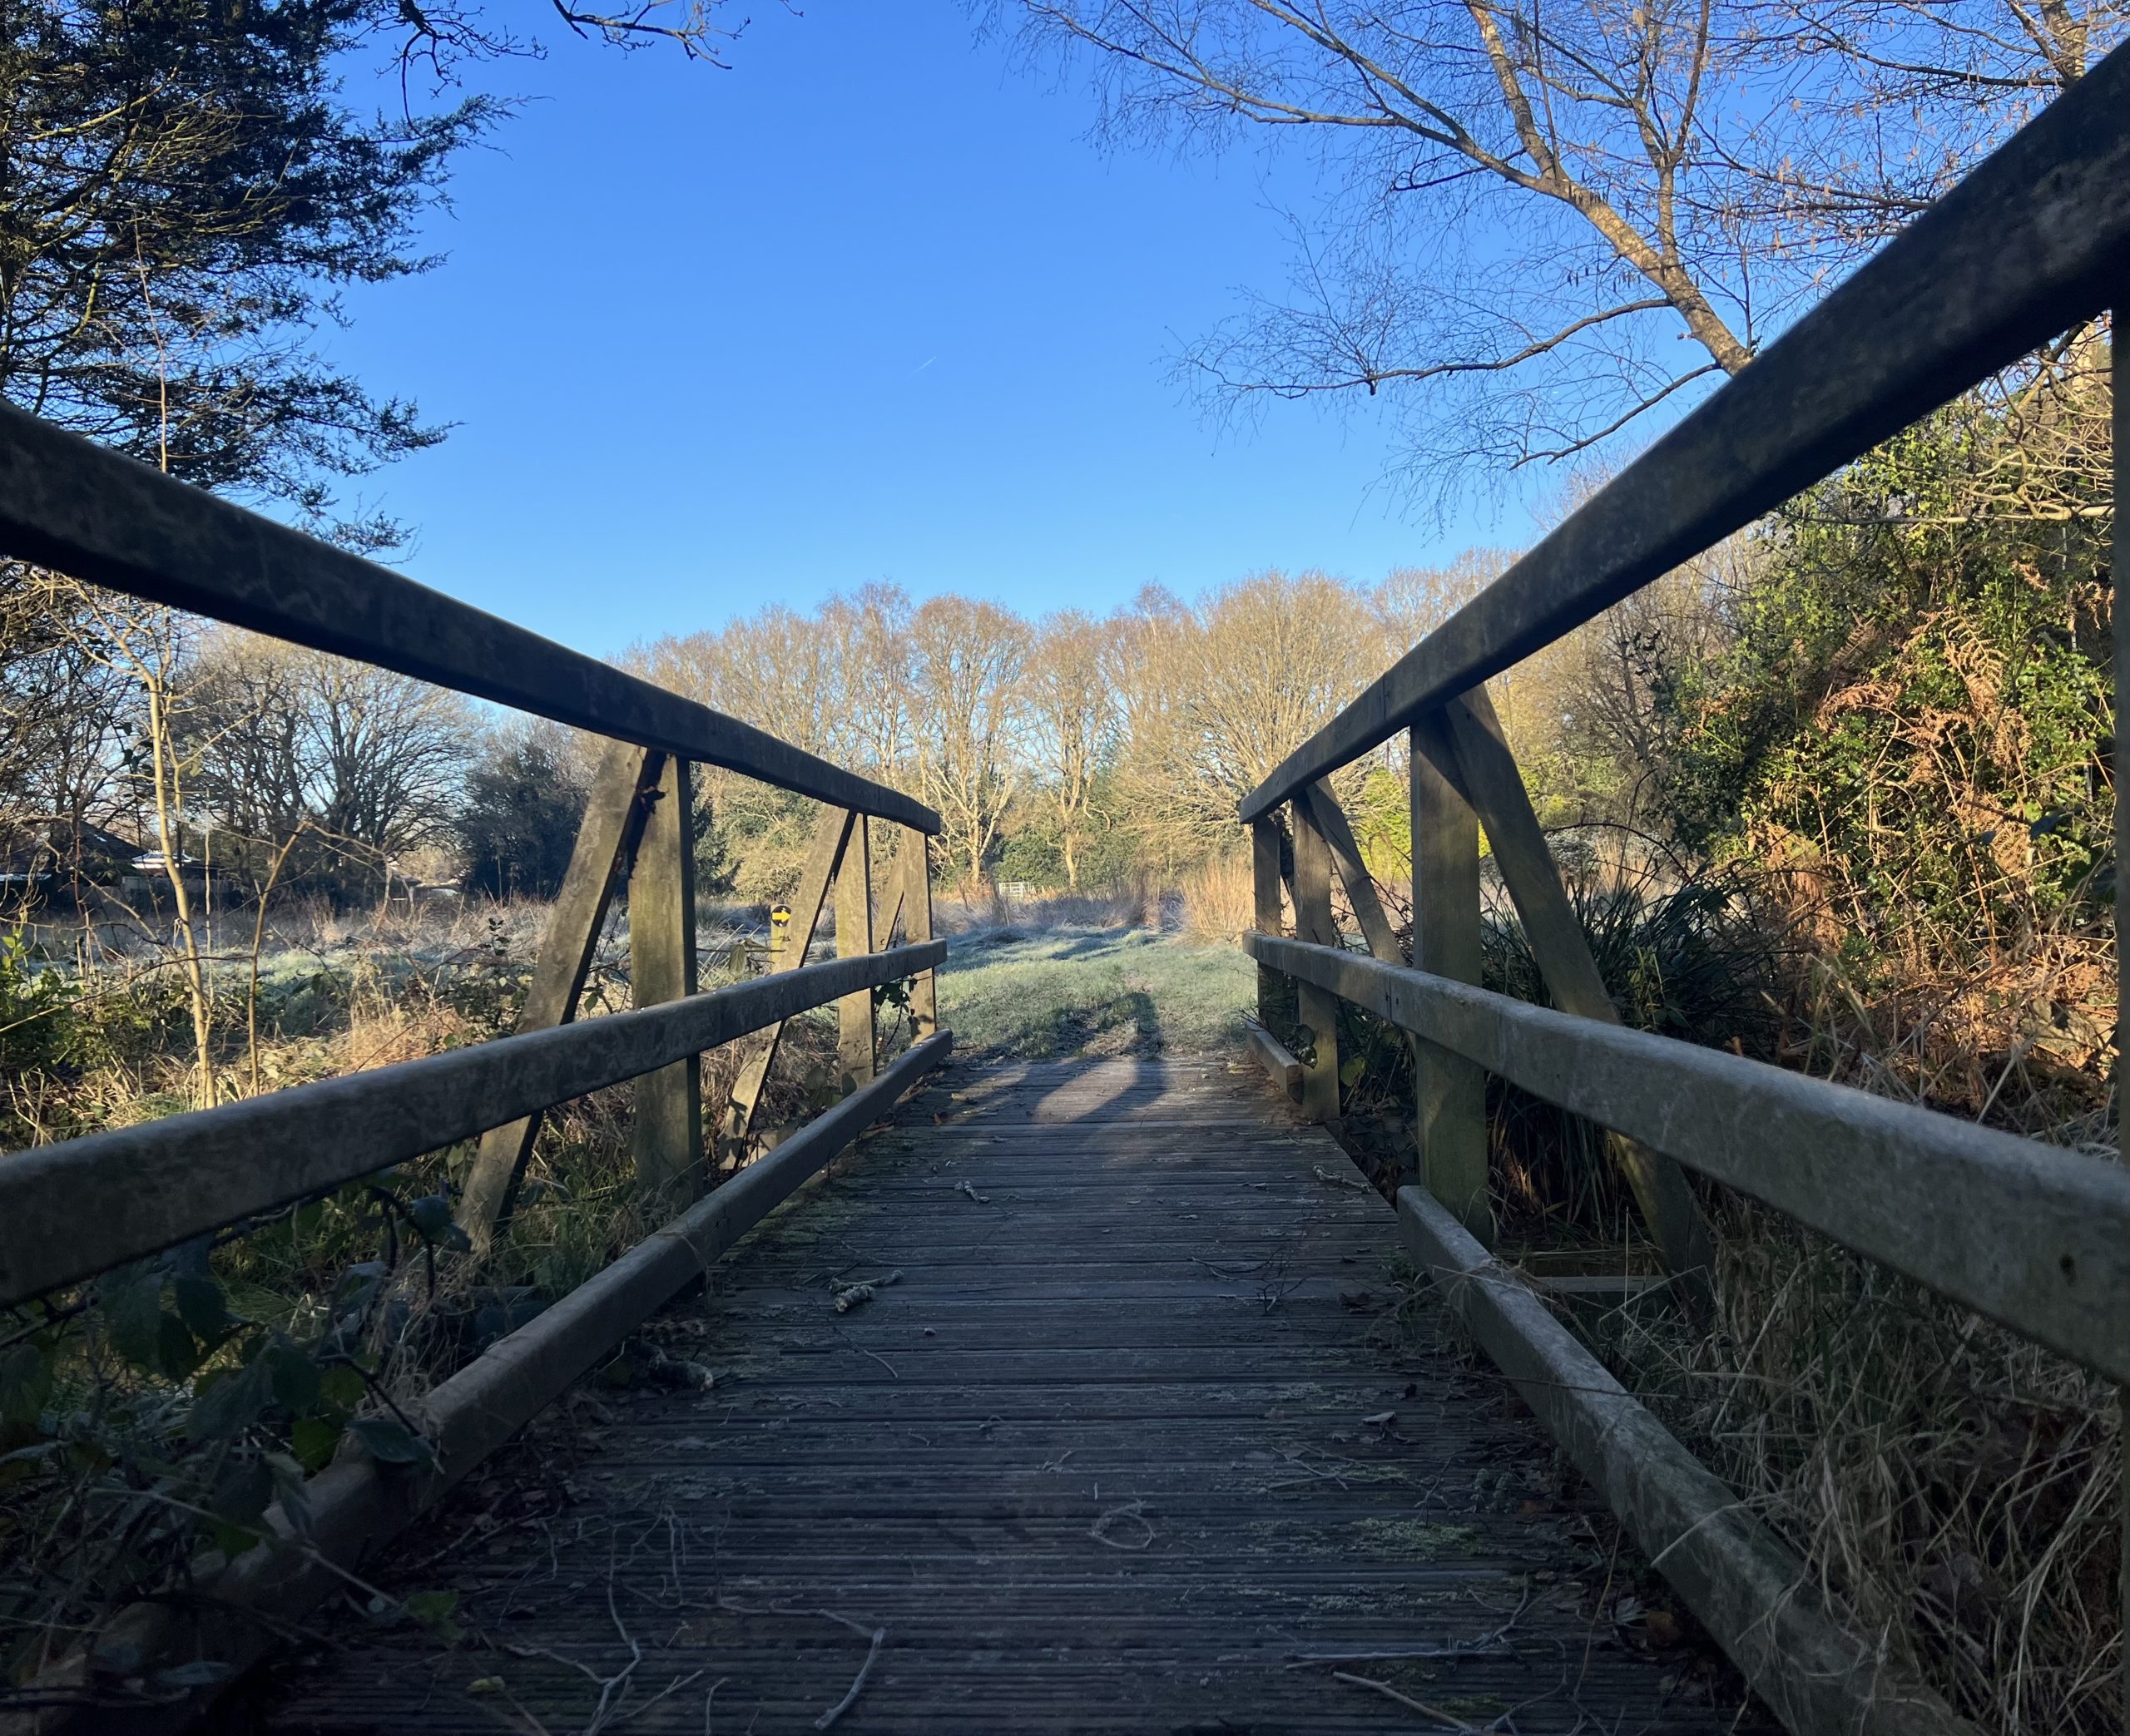 Looking down a wooden boardwalk towards a frosty meadow with bright blue sky in the background